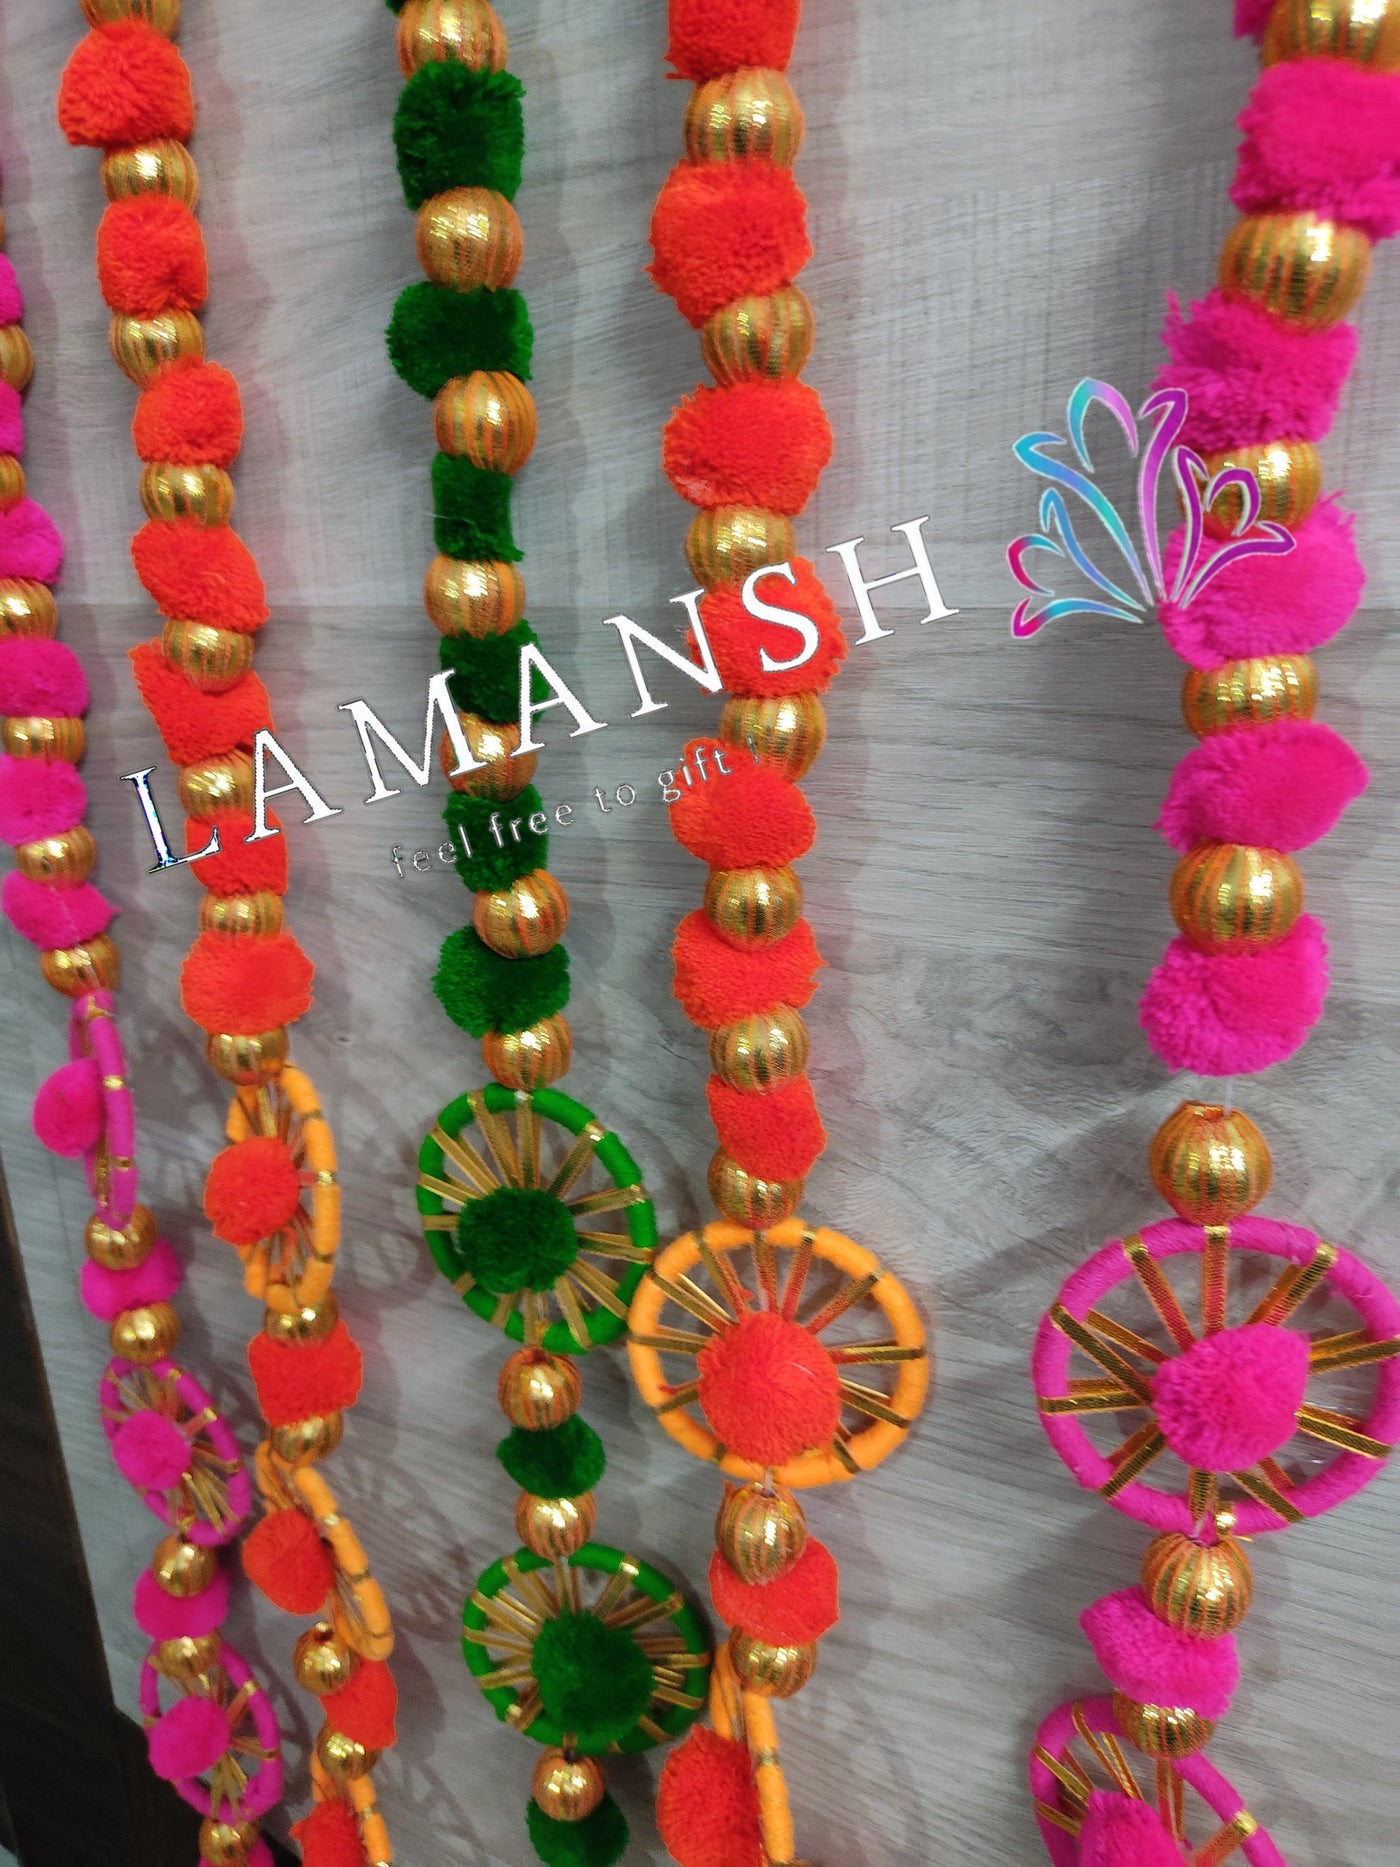 Lamansh gotta hangings Assorted colors / Gota , Woolen Tassels & other craft materials / 10 LAMANSH® 3 ft each Pack of 10 Decorative Round Gota Ring Chakri hangings with Bells & Pom Poms for indian wedding decoration & backdrops / ethnic event decoration products for Diwali